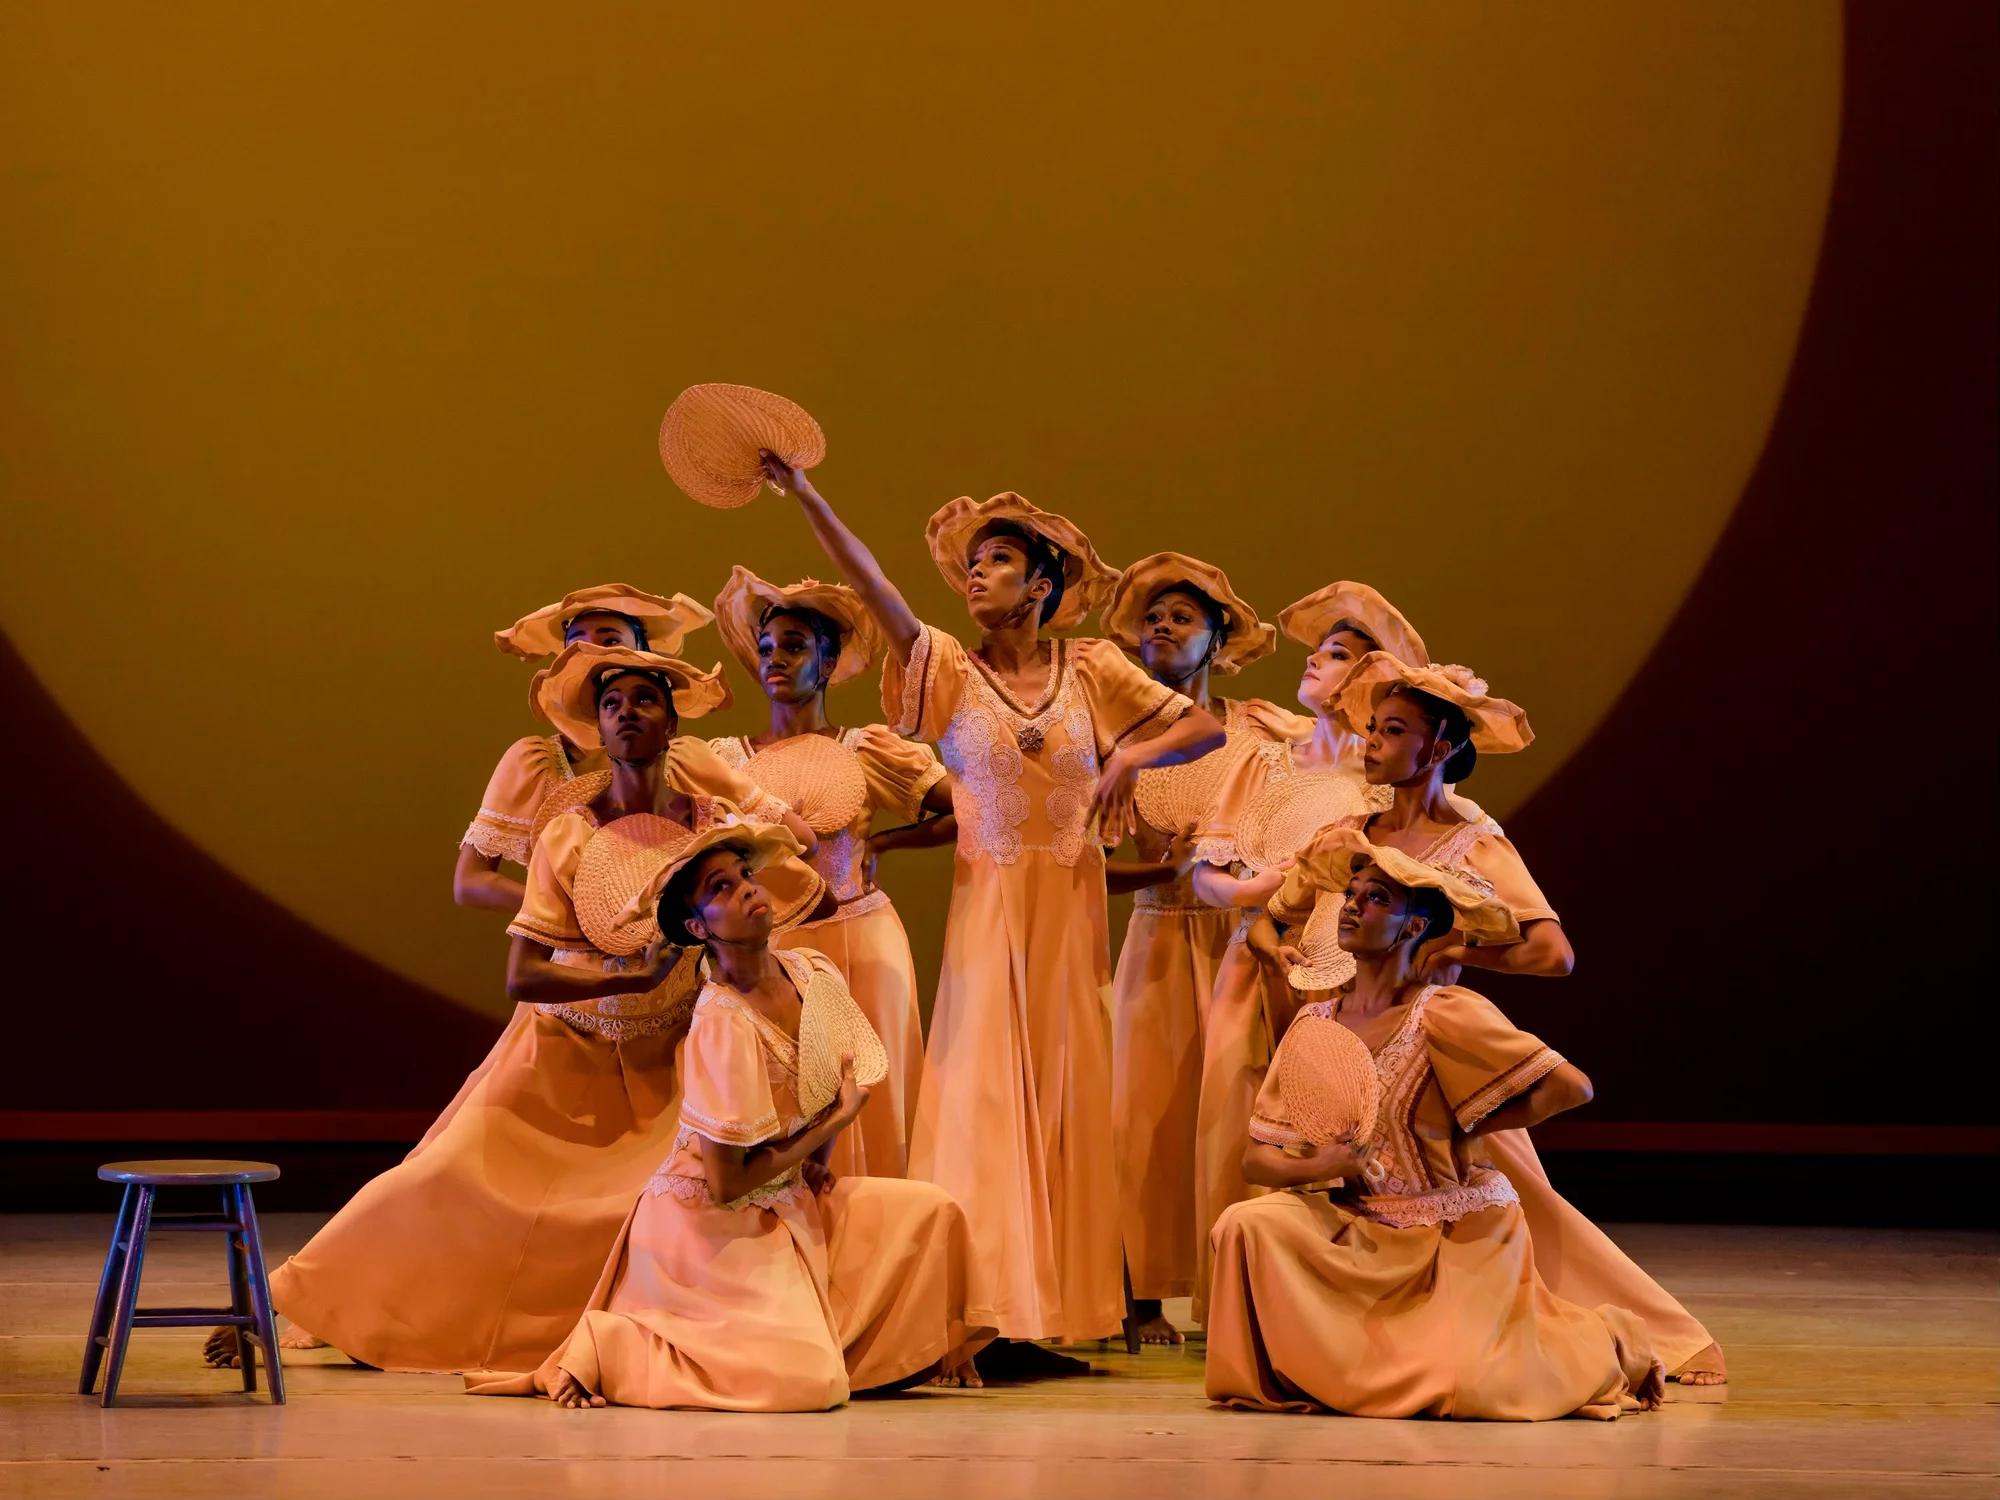 Color photograph of nine women standing on a stage, surrounded by three dark-wooded stools. The women wear long, yellow-colored gowns, wear straw sun hats, and have straw fans in their hands. One woman extends her arms, fan in hand, to what they all have their gaze set to.